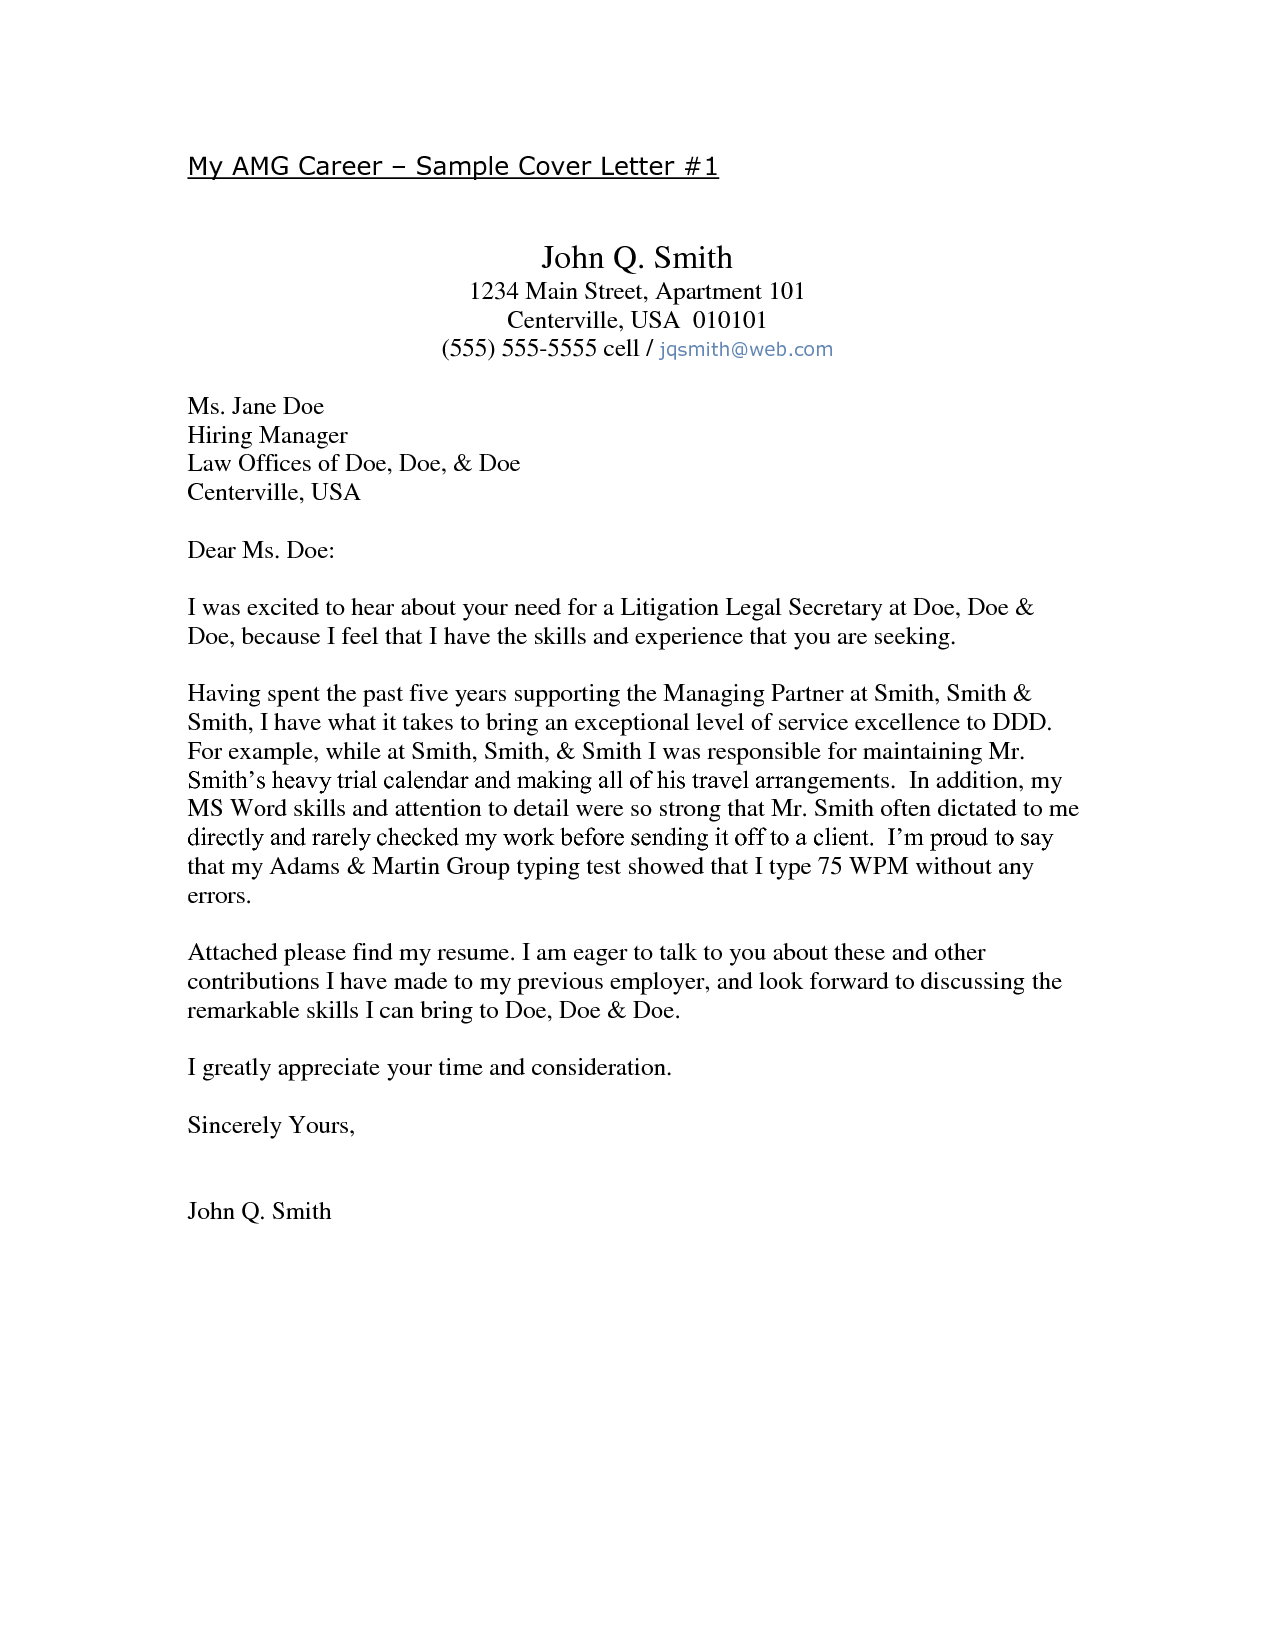 application letter as a secretary in a law firm